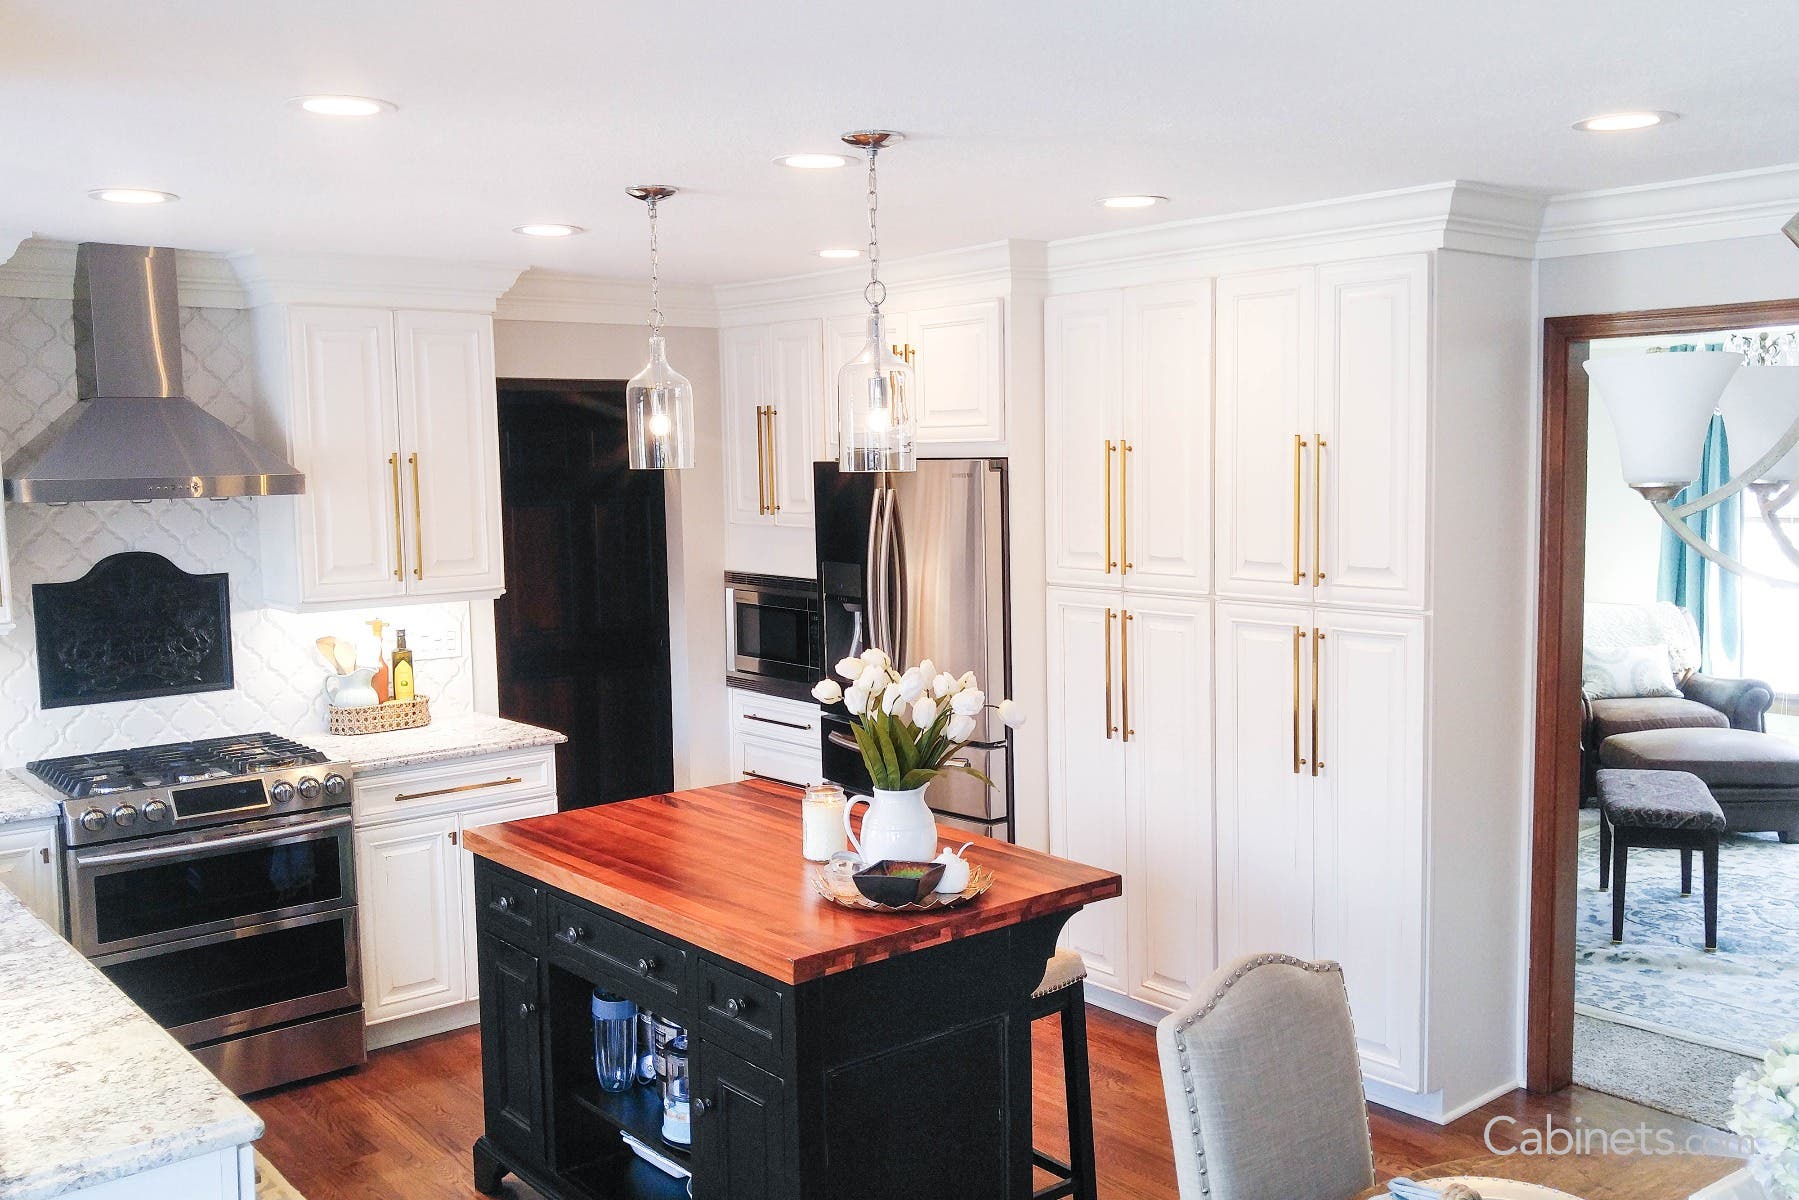 Bright white cabinets with gold bar pulls and a black island with black knobs